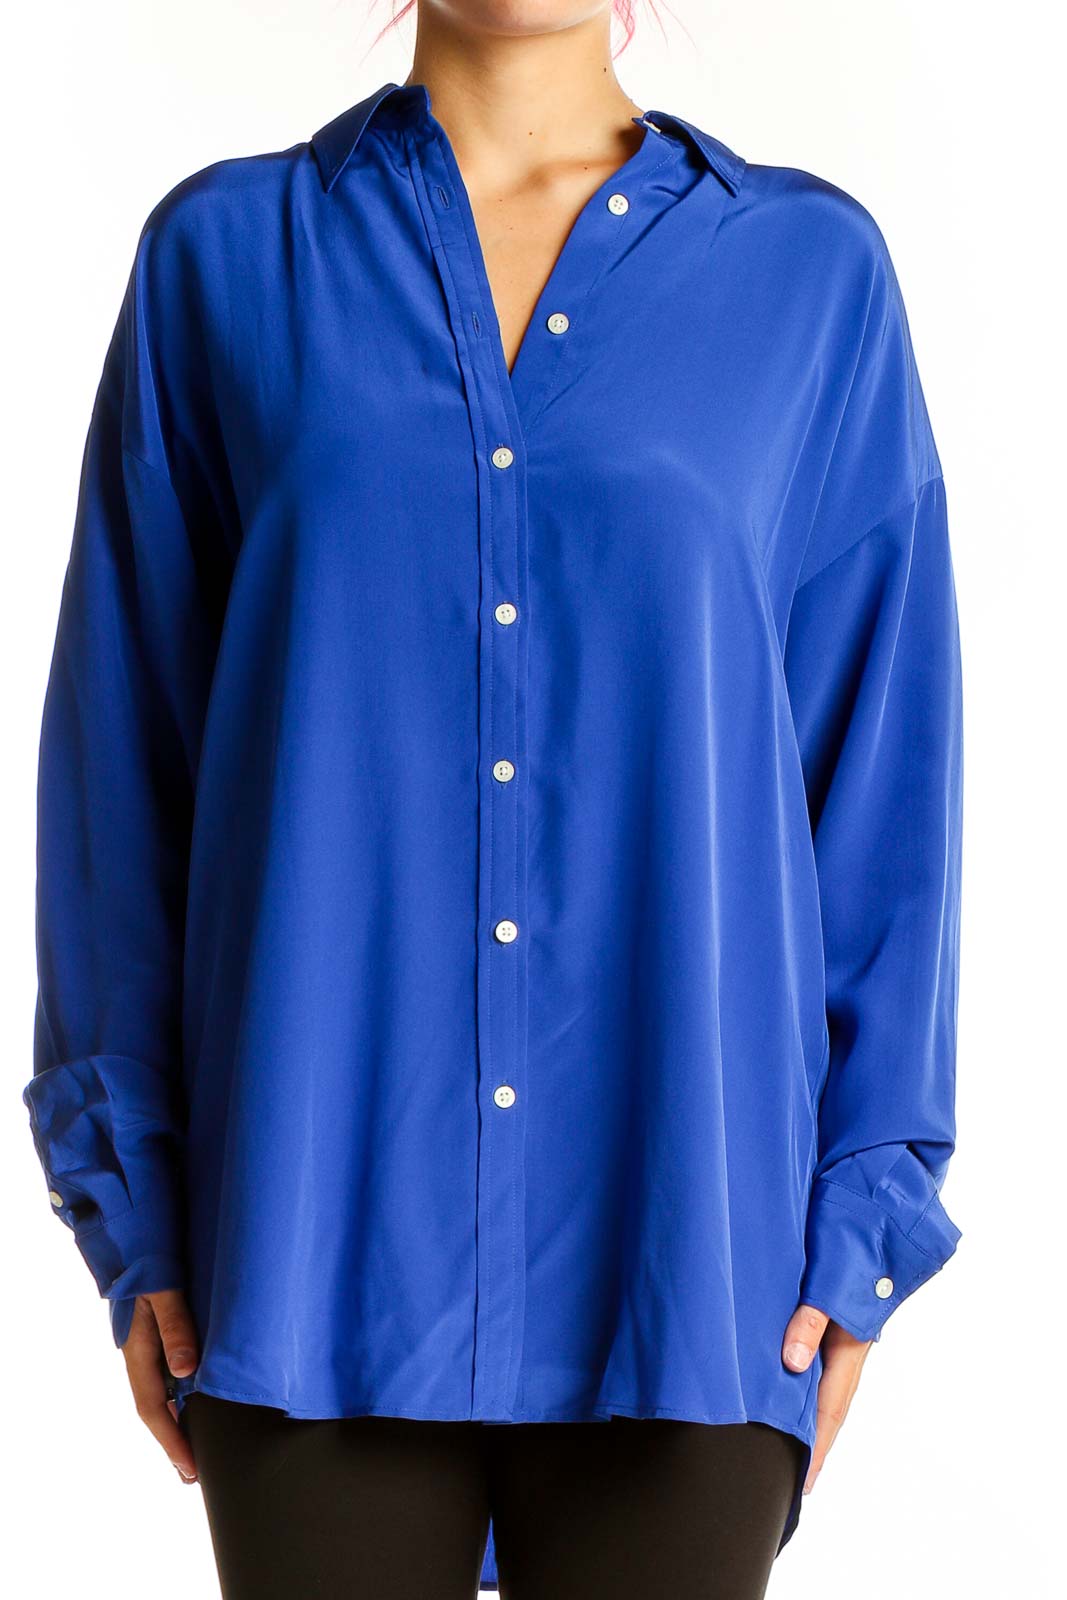 Blue Solid Shirt Top Front